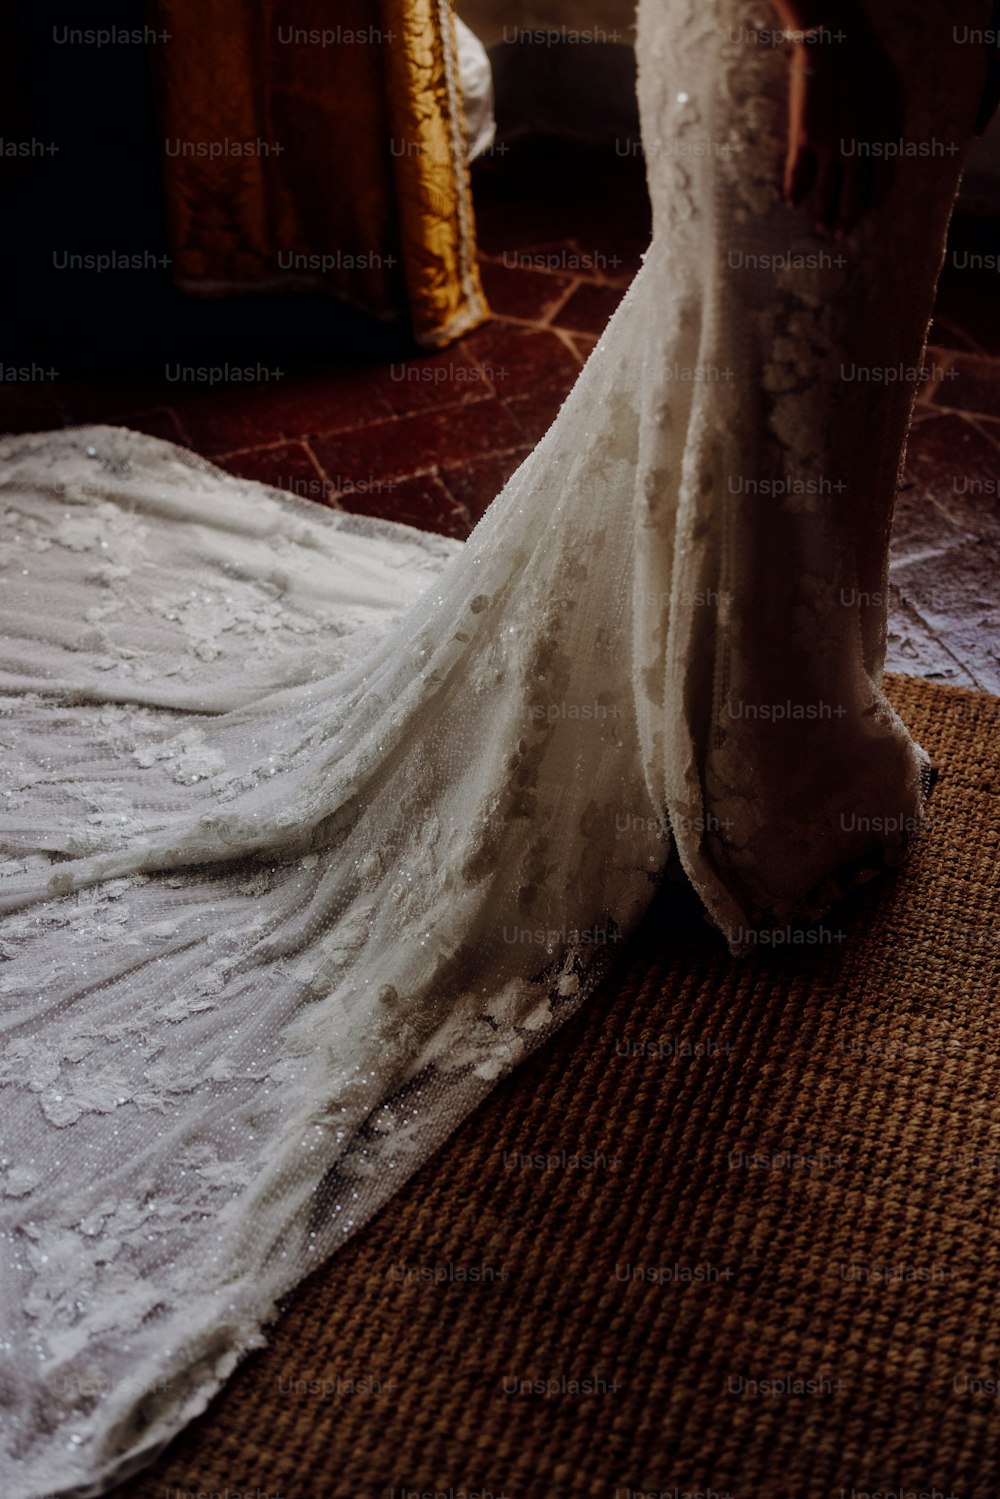 a close up of a person in a wedding dress